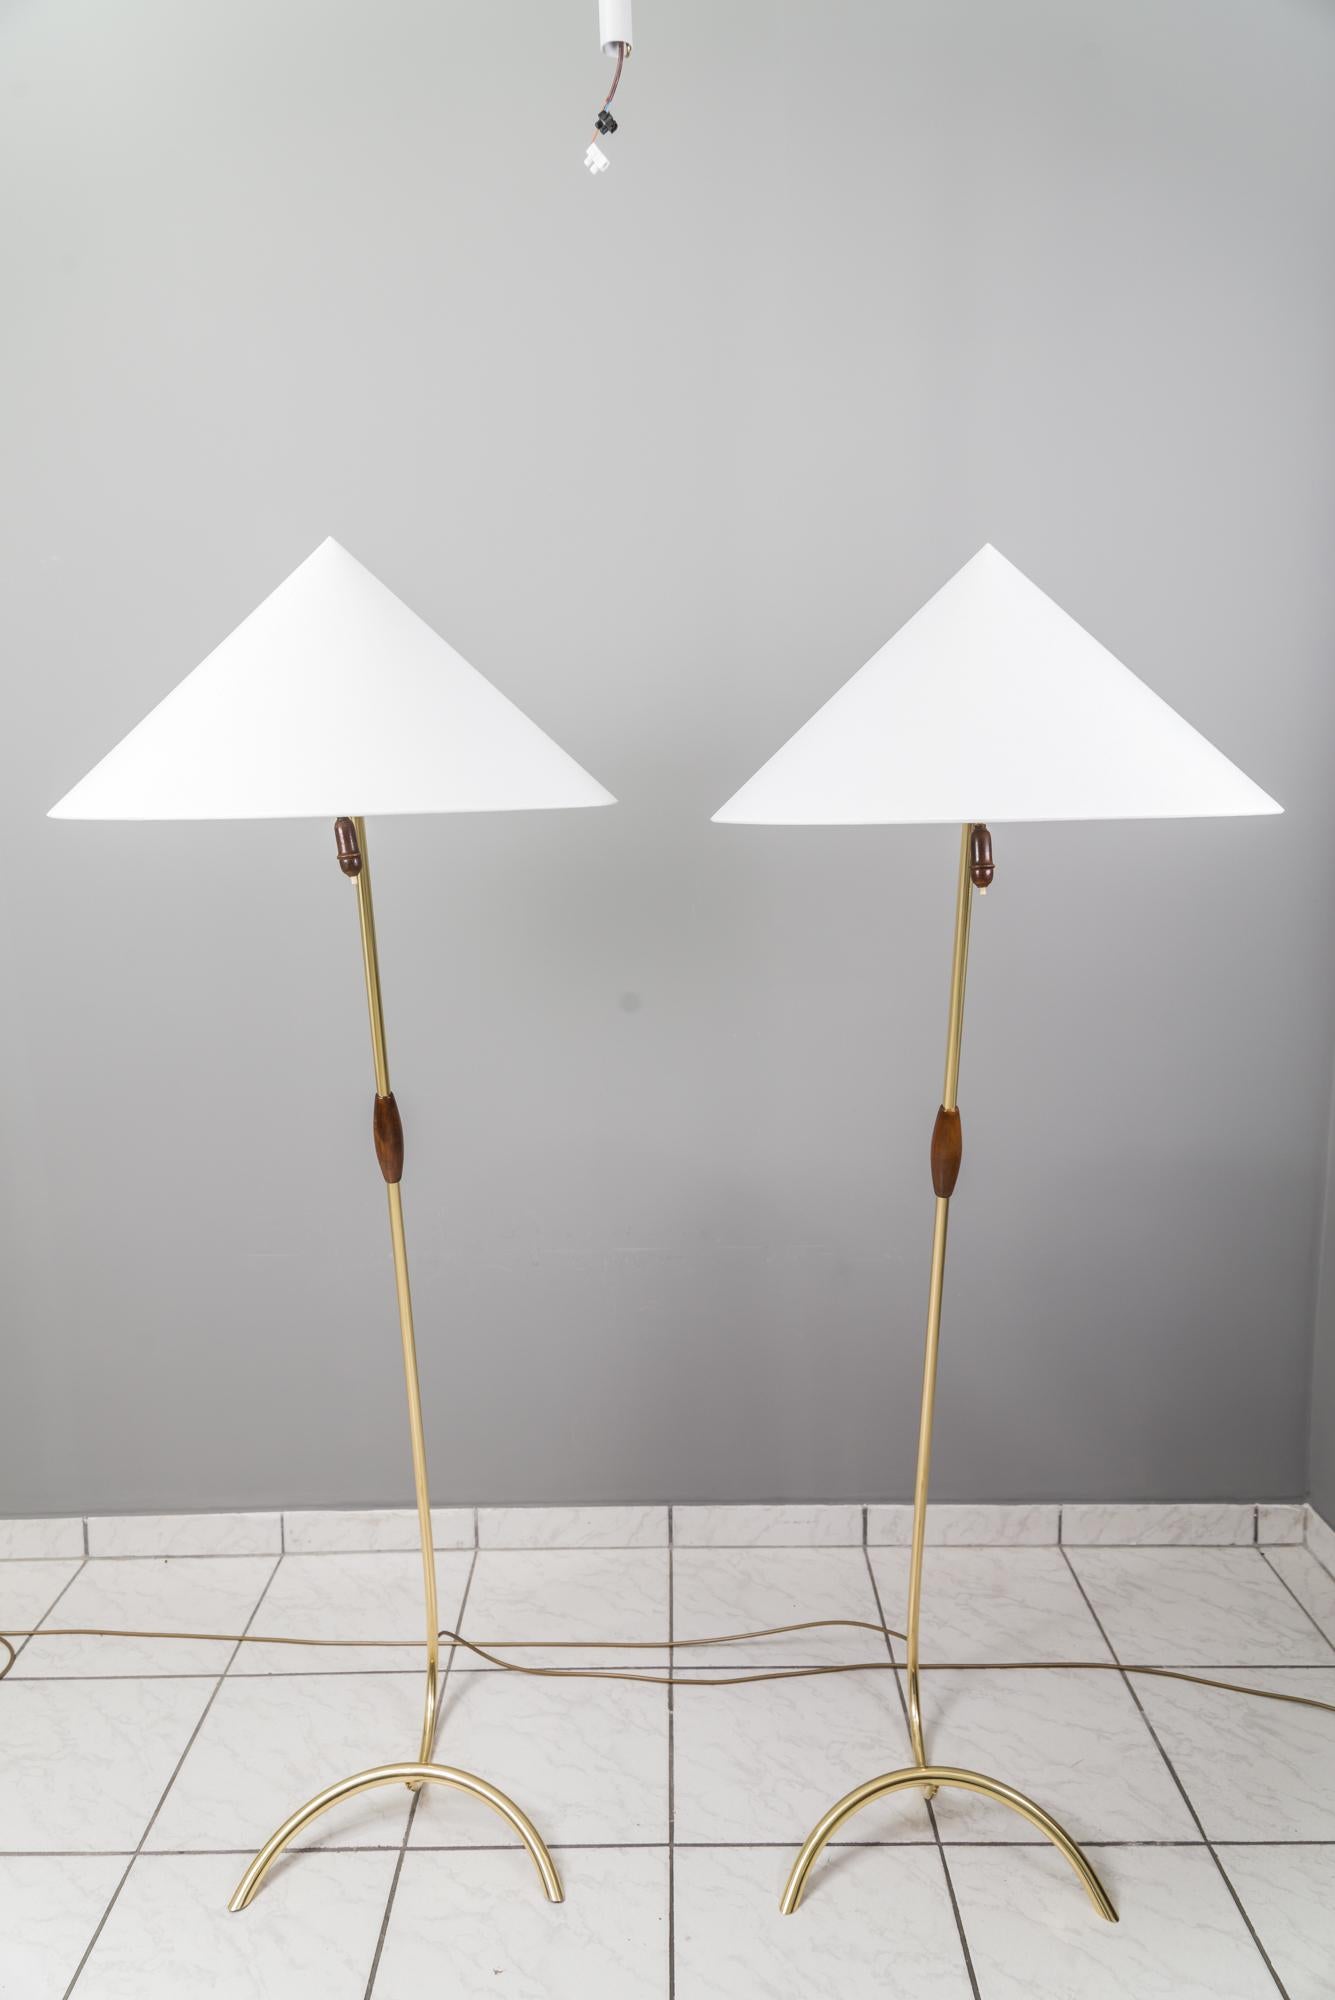 Two Rupert Nikoll Floor Lamps, circa 1950s For Sale 7